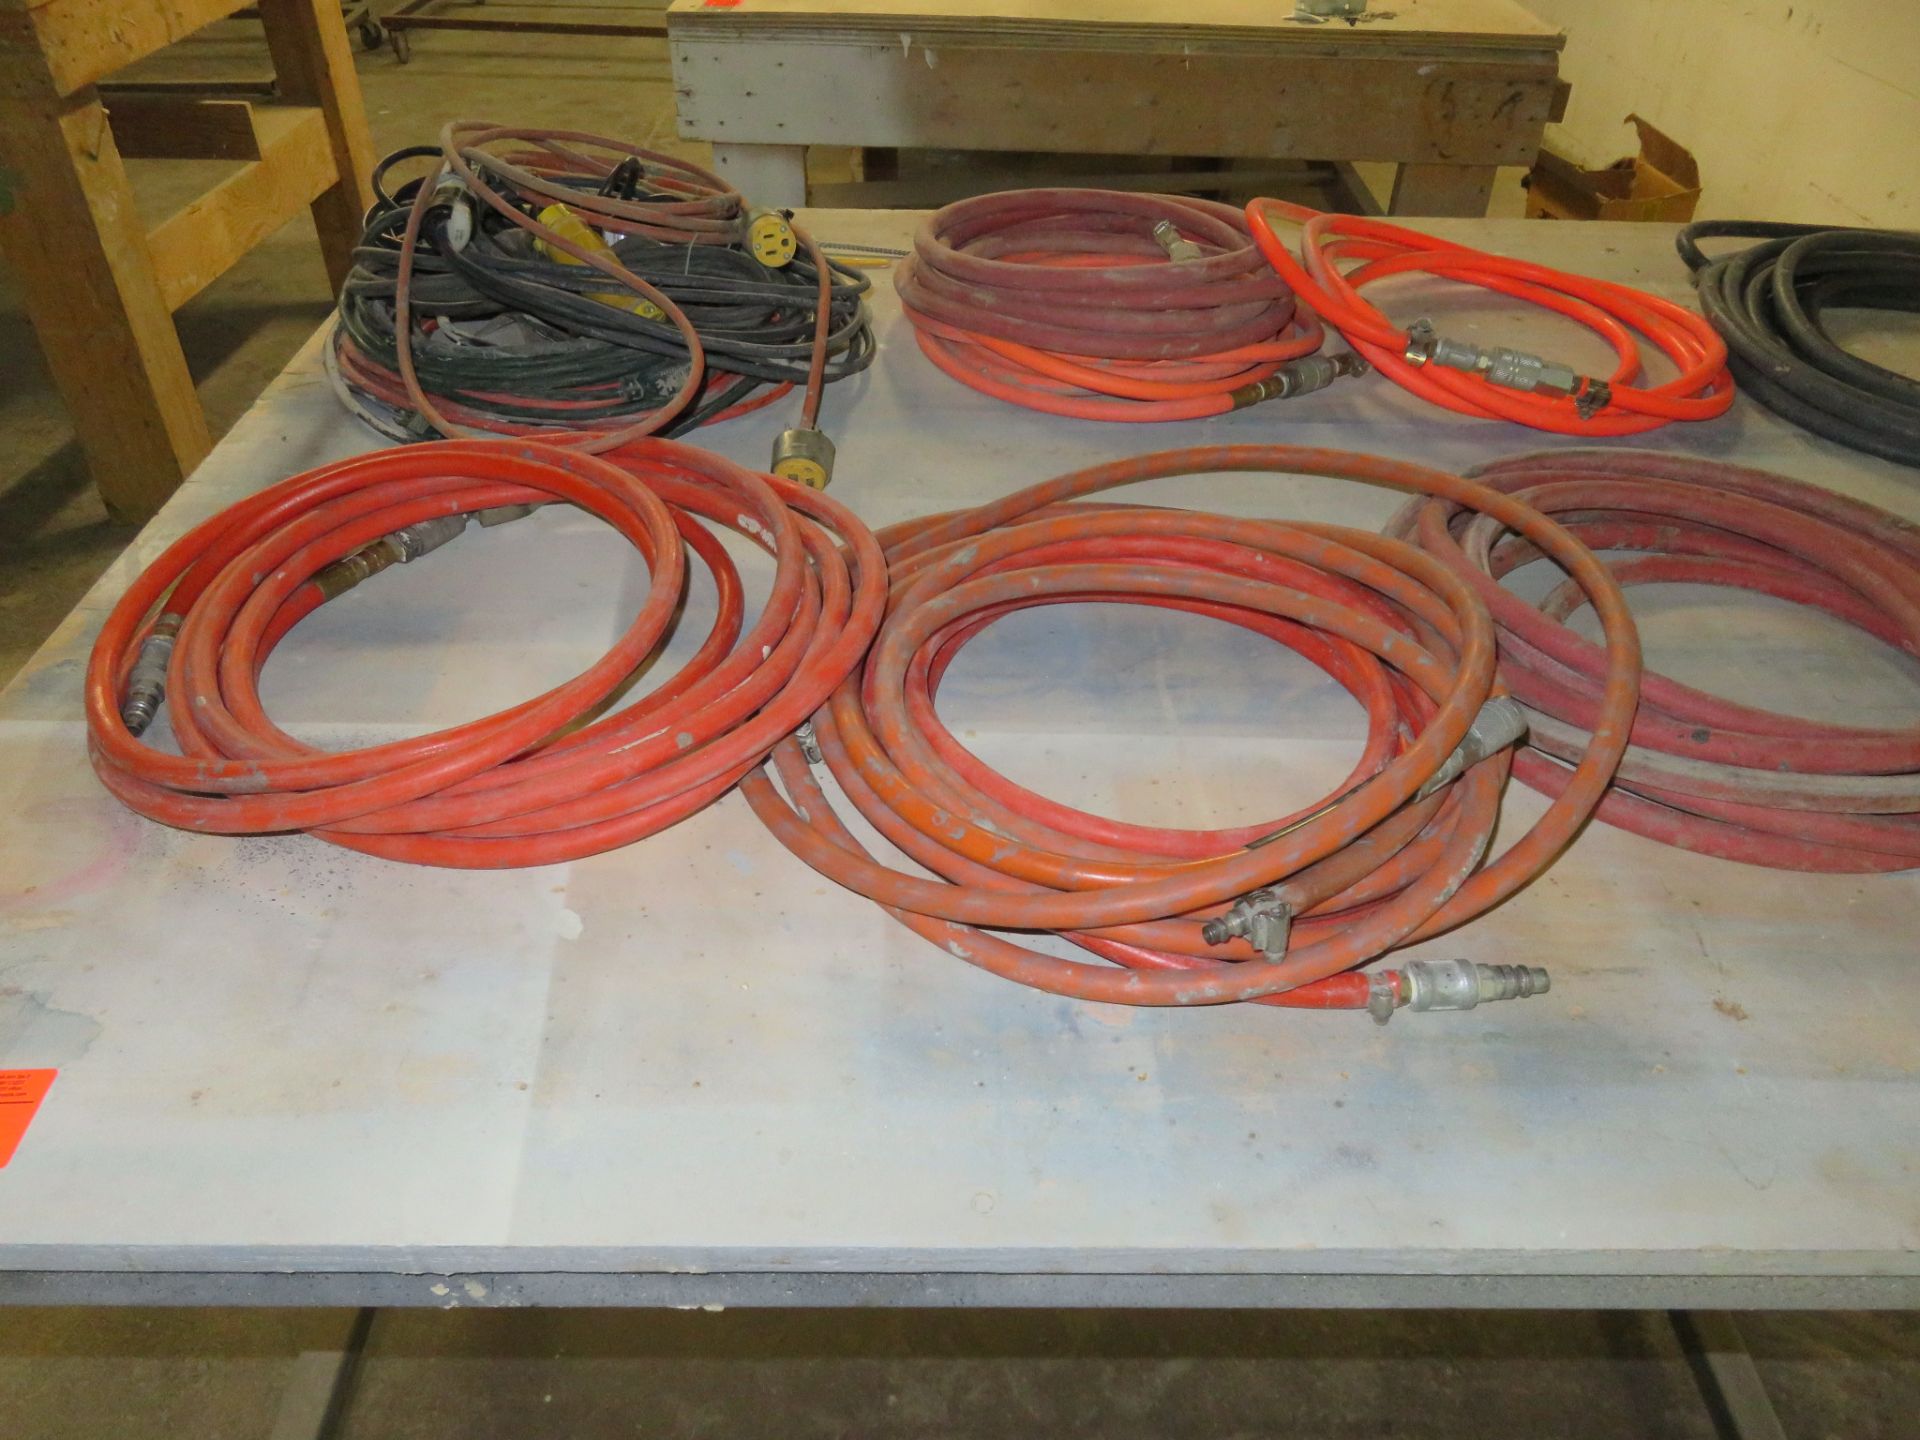 Welded Work Table approx 4'x8' & Hoses Lot - Image 2 of 4